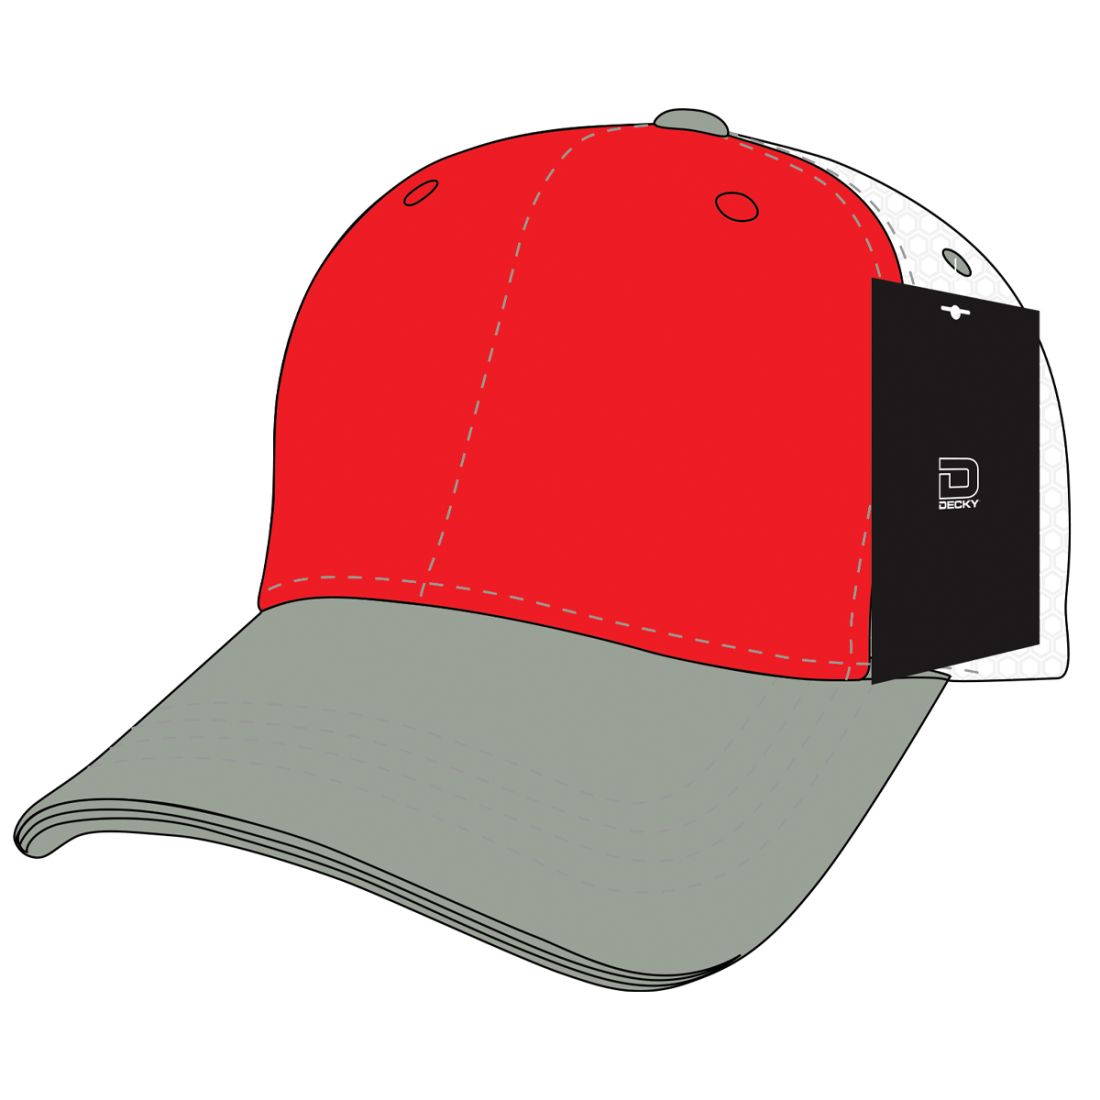 Heather Grey/Red/White color variant